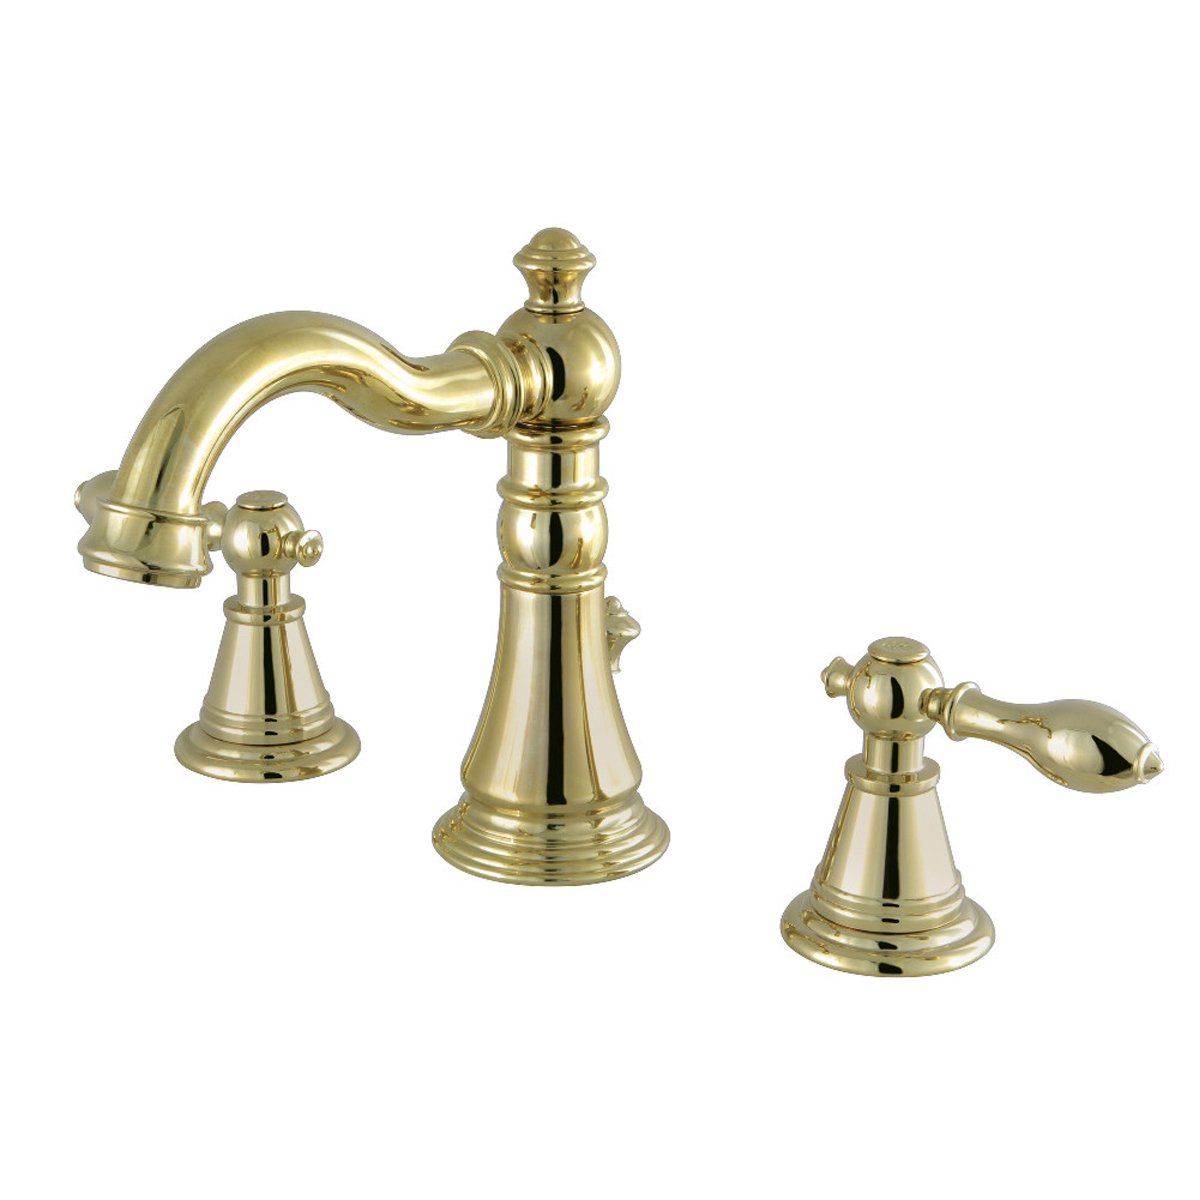 Kingston Brass Fauceture English Classic Widespread Bathroom Faucet